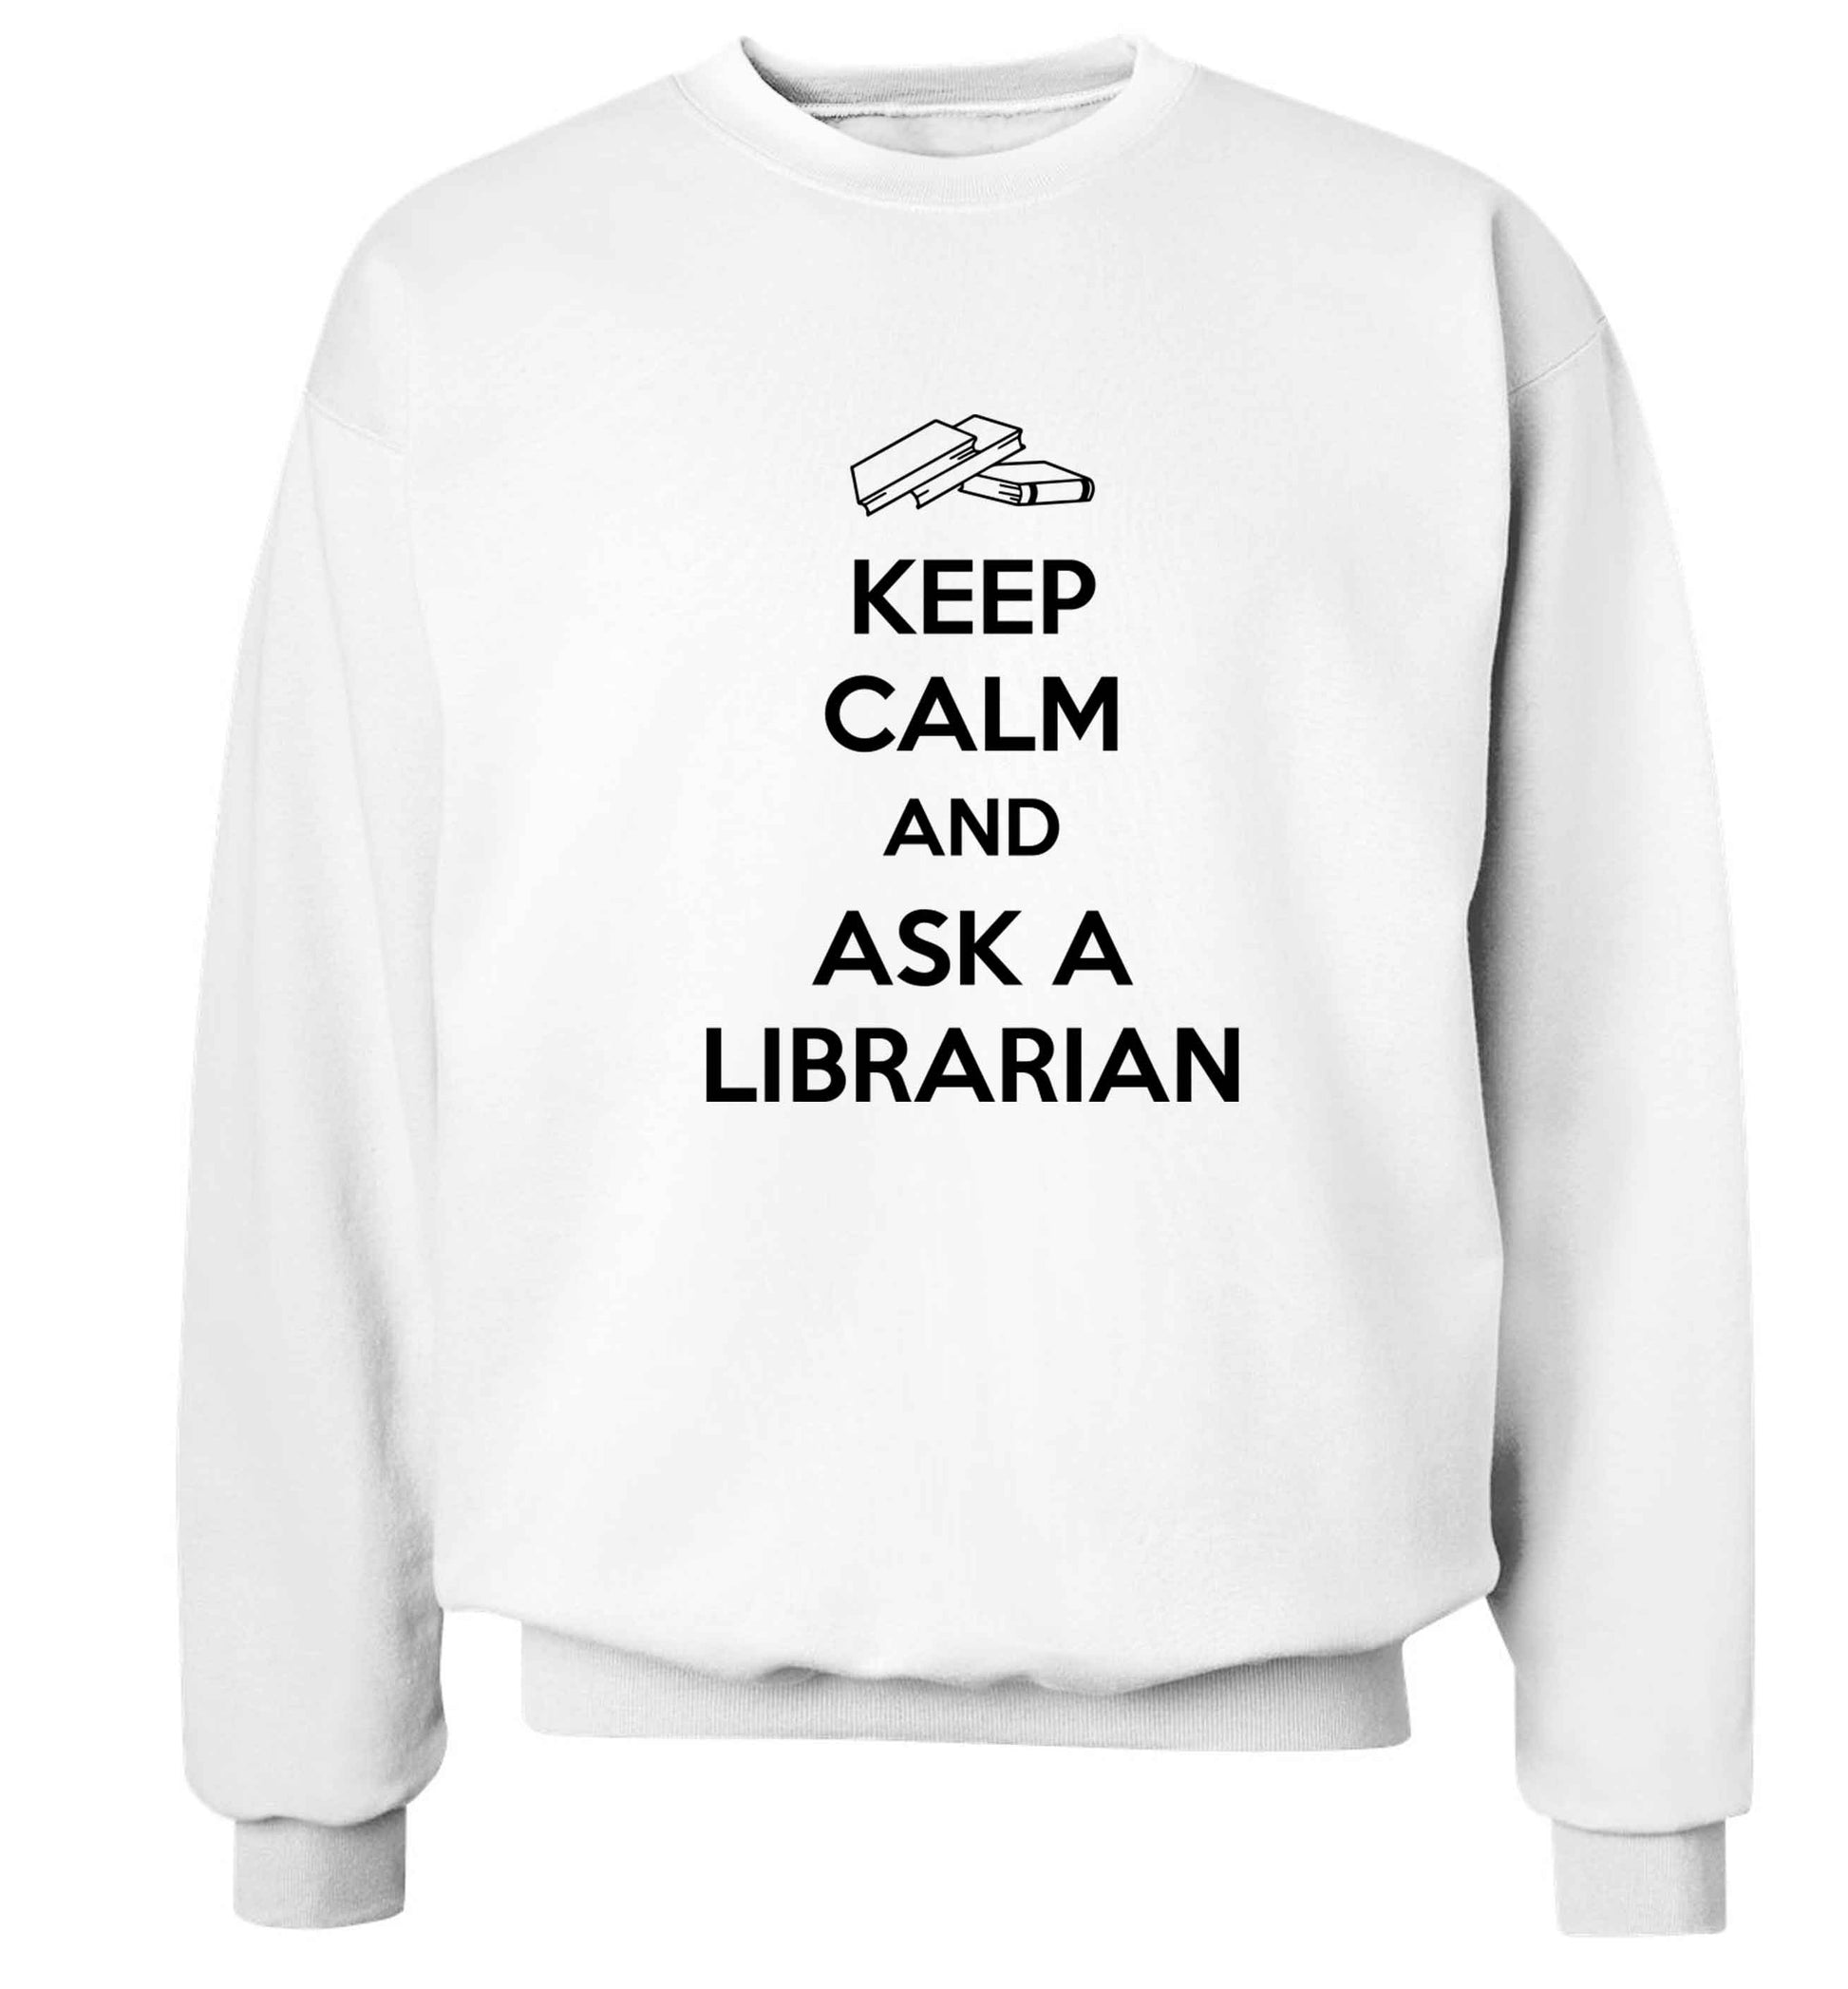 Keep calm and ask a librarian Adult's unisex white Sweater 2XL